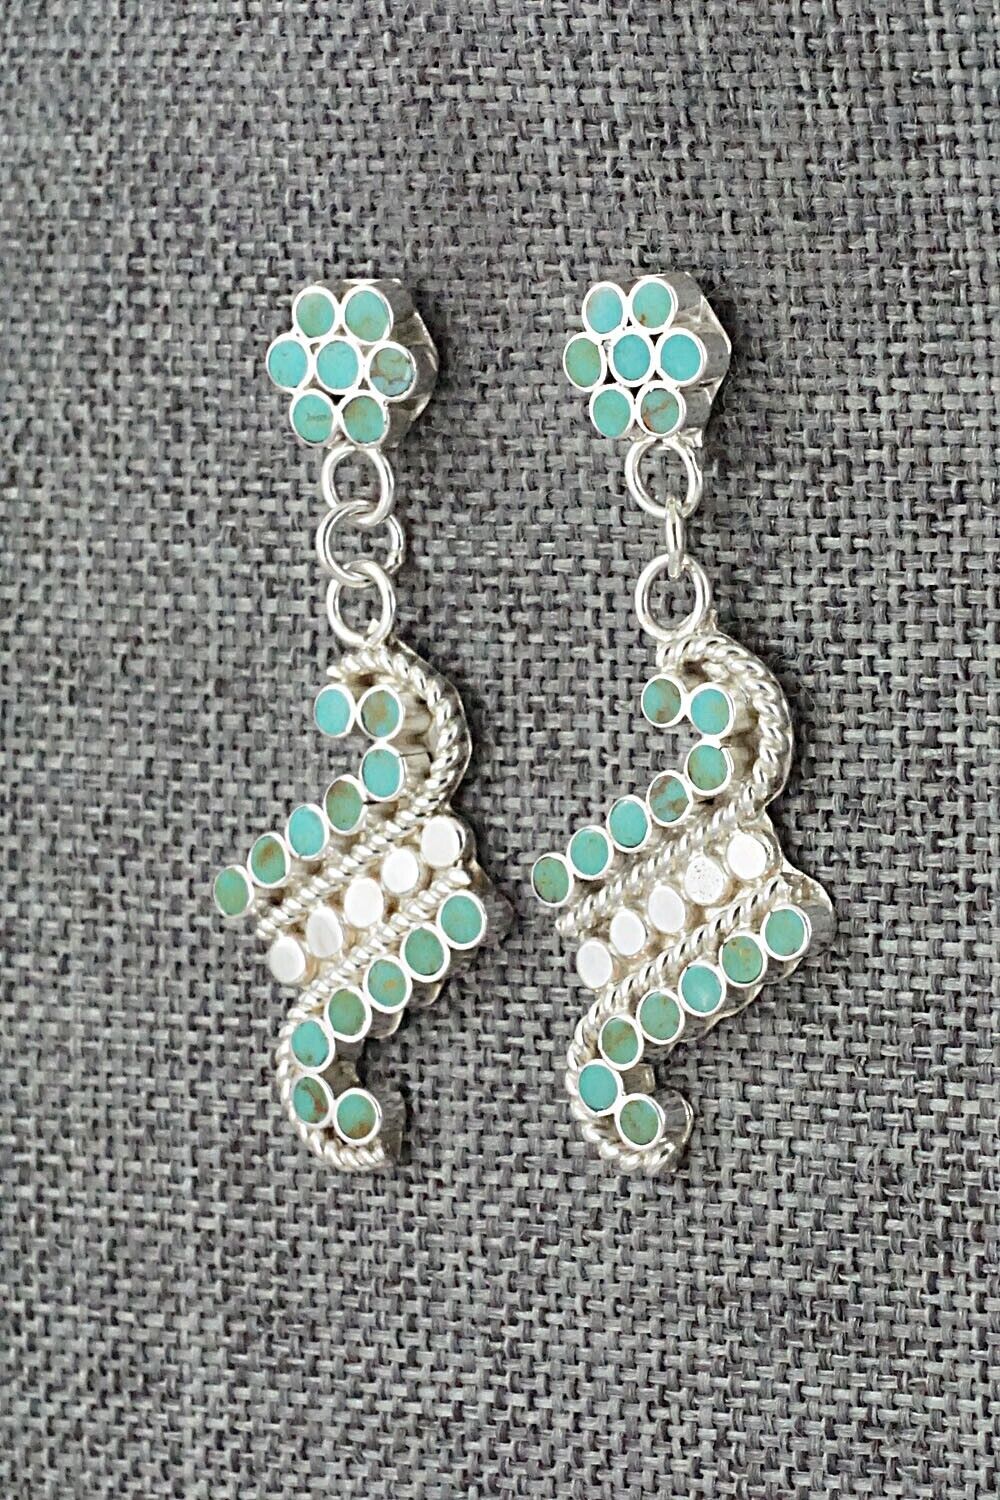 Turquoise & Sterling Silver Earrings - Michelle Peina